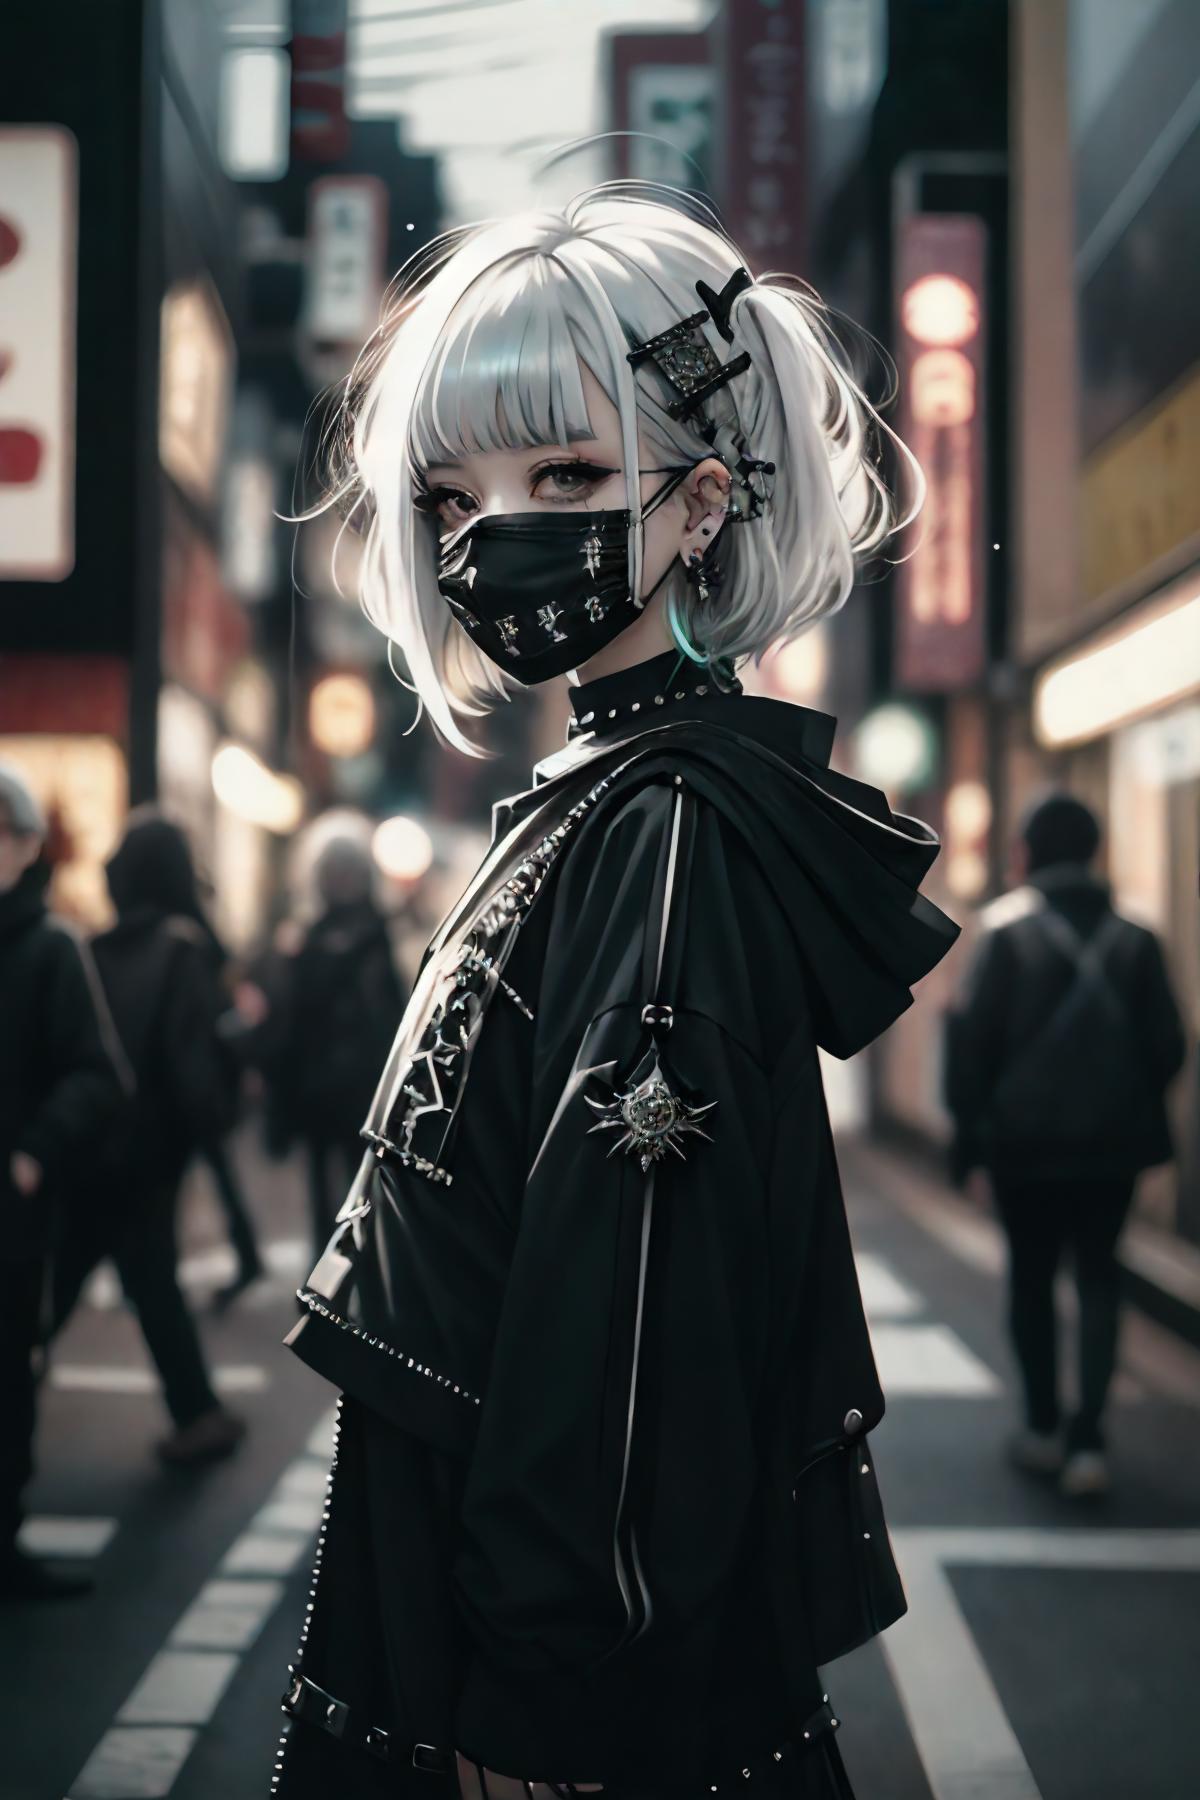 A woman with blonde hair and a gas mask on her face stands in a city street.